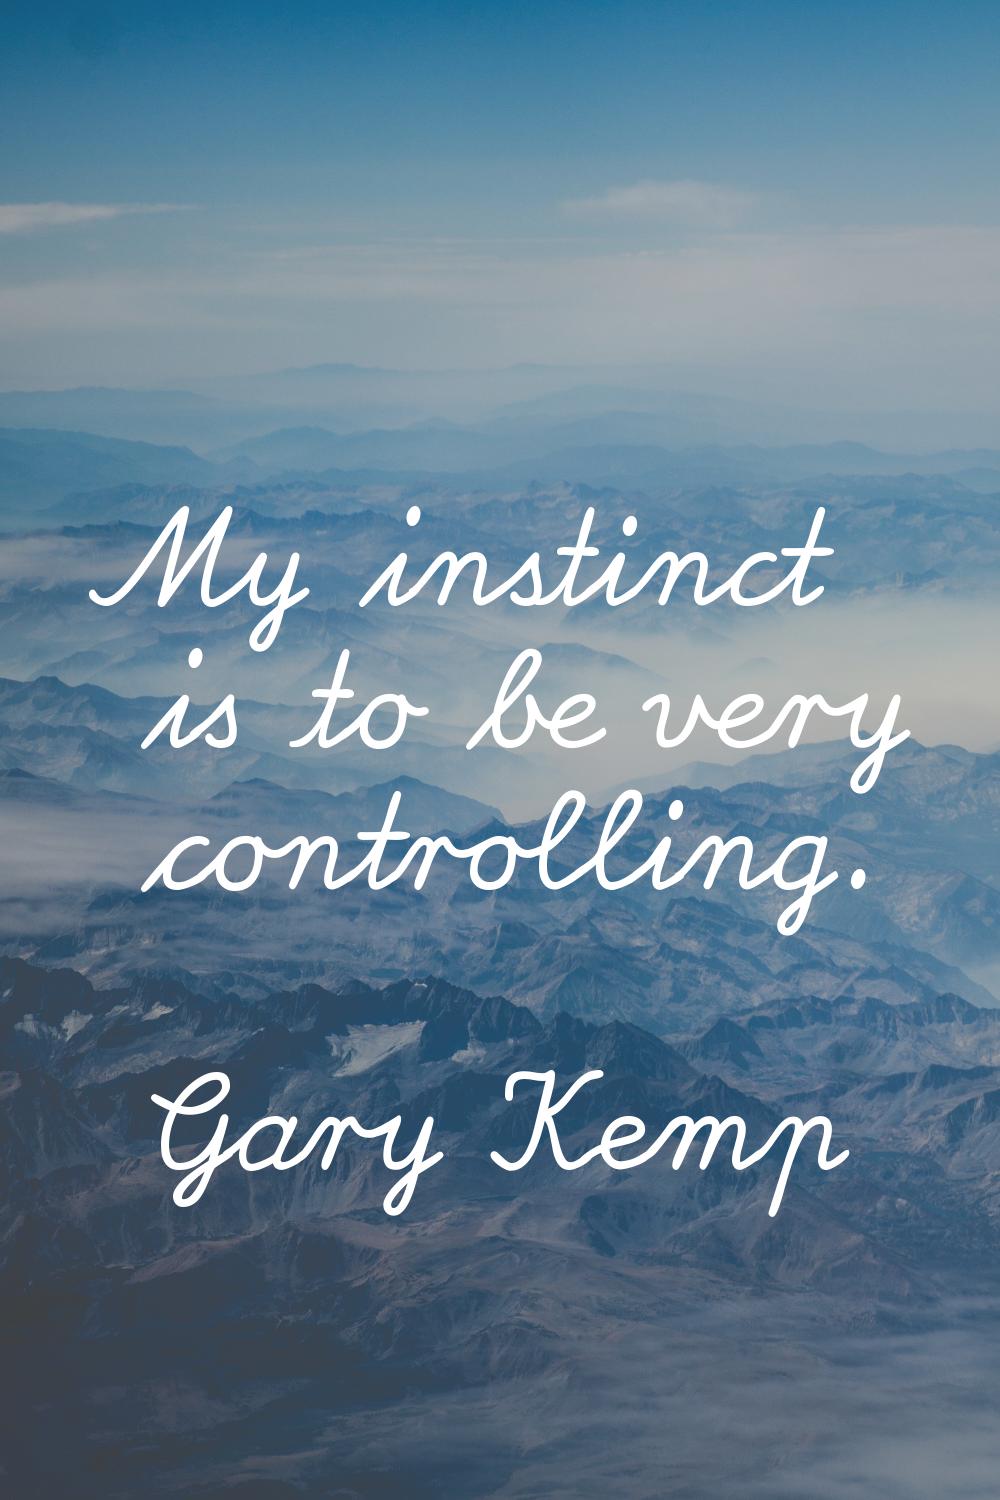 My instinct is to be very controlling.